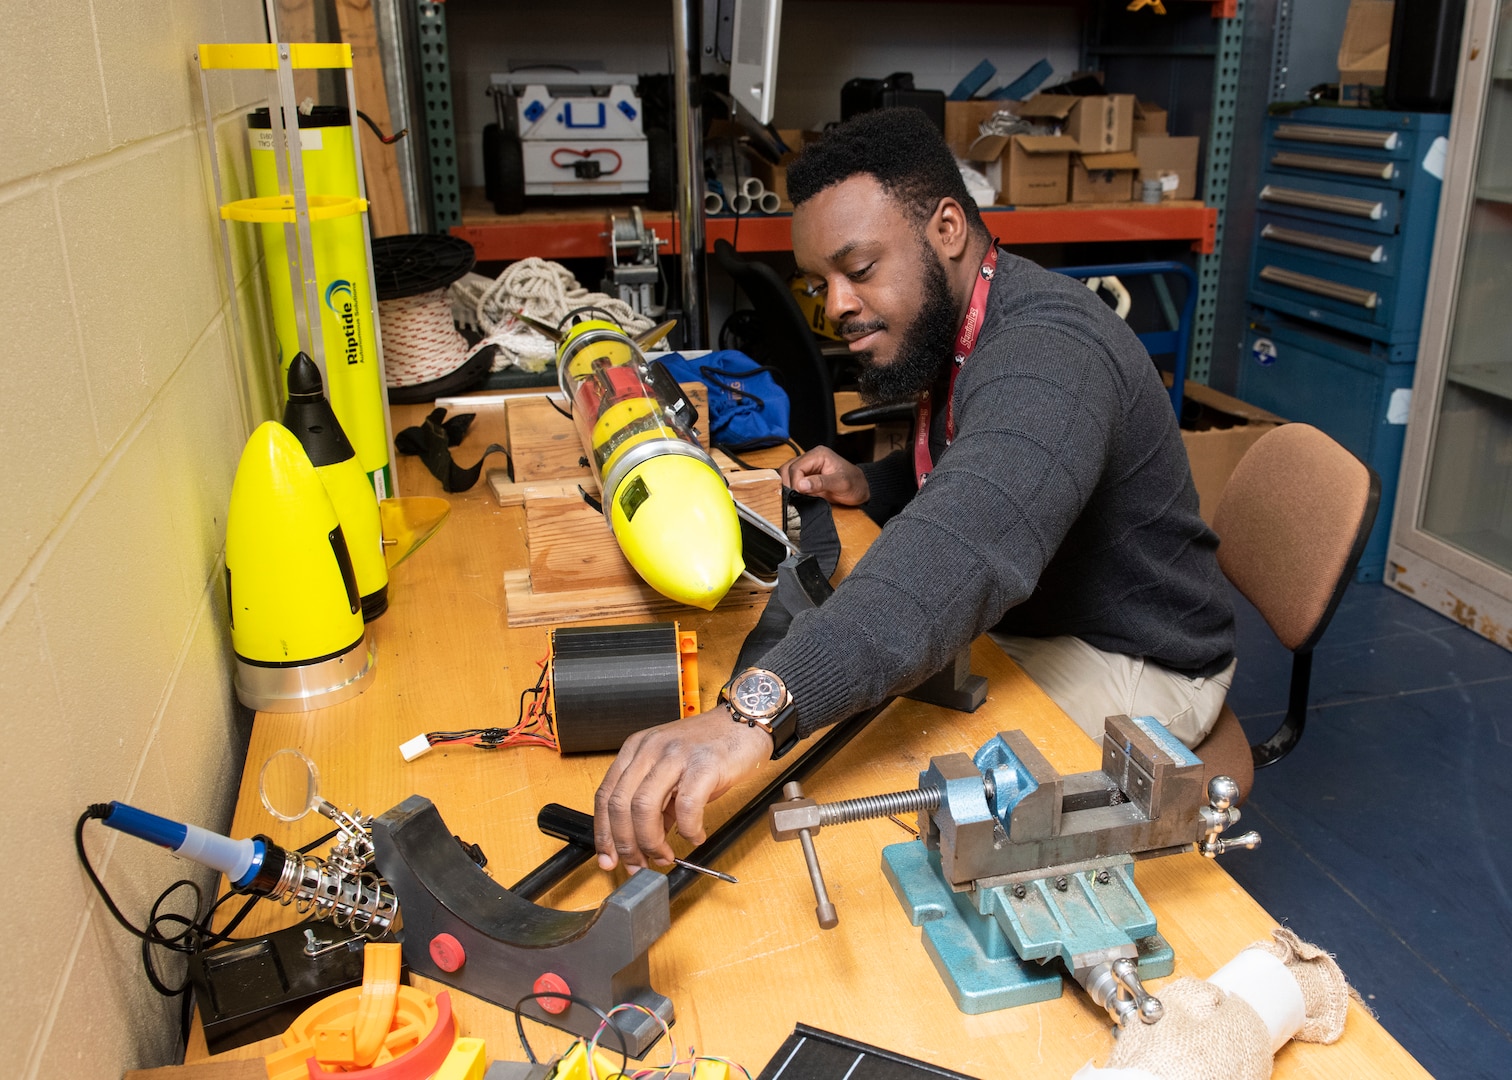 Naval Surface Warfare Center Panama City Division Mechanical Engineer Harry Philippeaux integrates and assembles components of a Riptide Unmanned Underwater Vehicle.